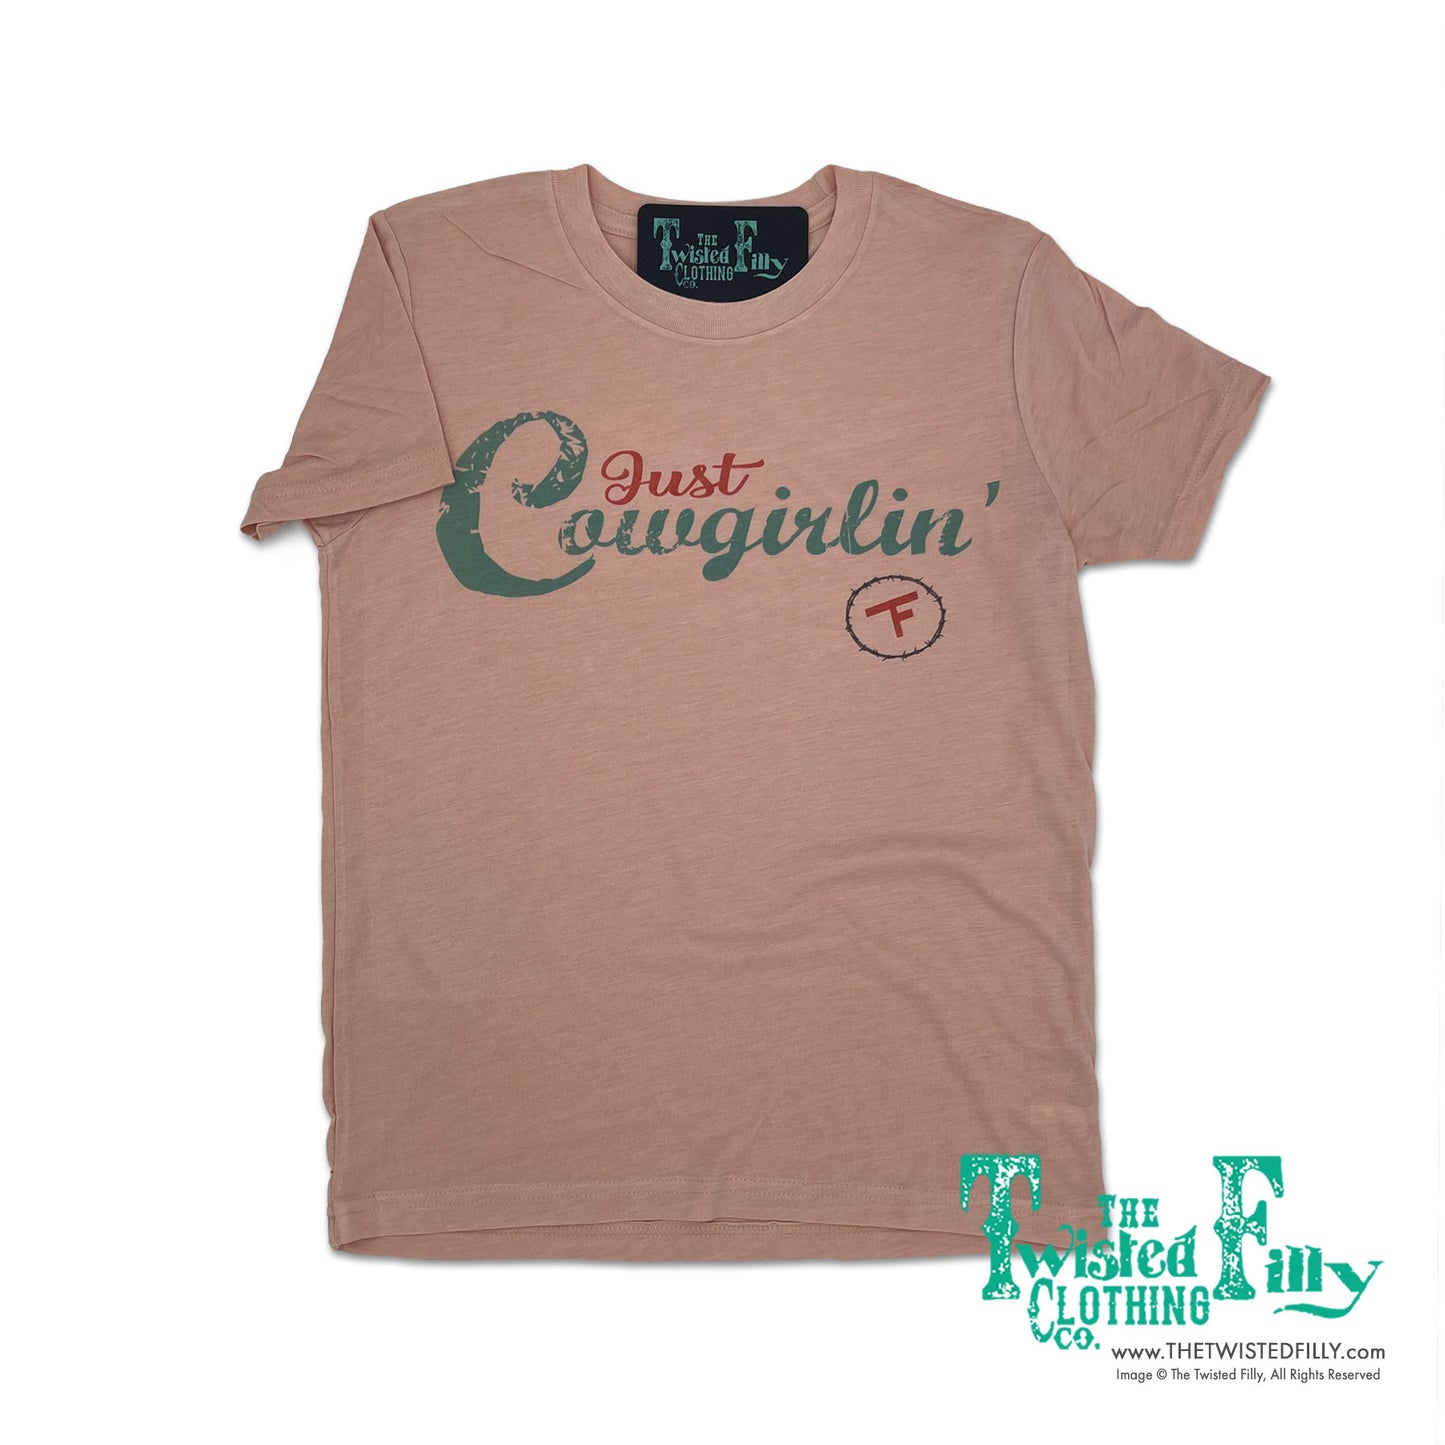 Just Cowgirlin' Girls S/S Toddler Tee - Dusty Rose